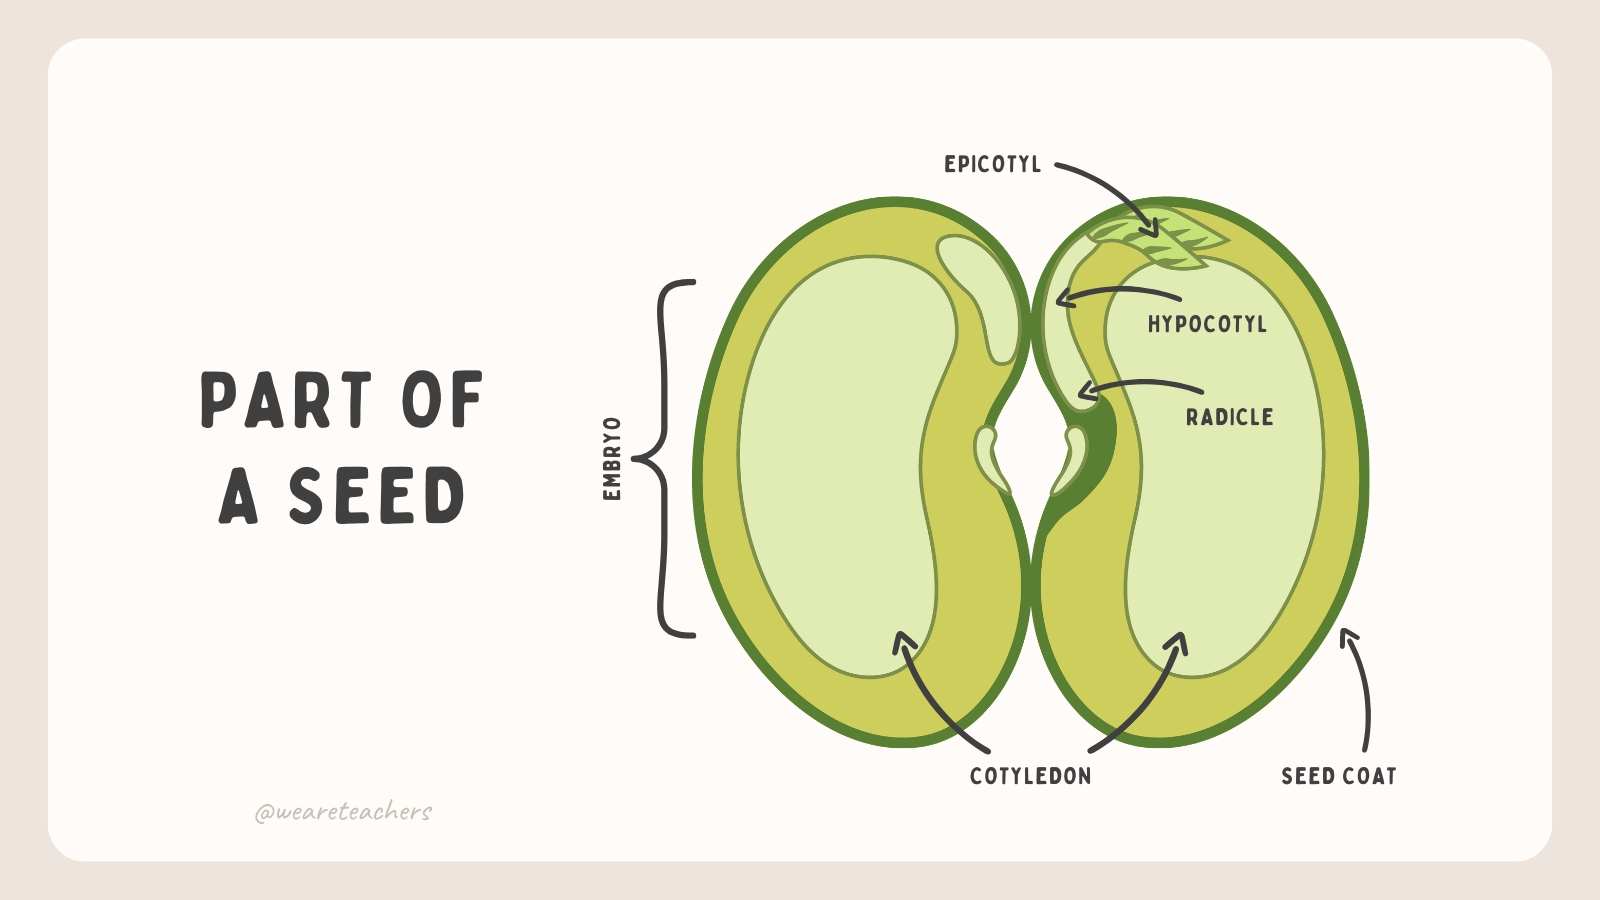 Diagramfeaturing parts of a seed.